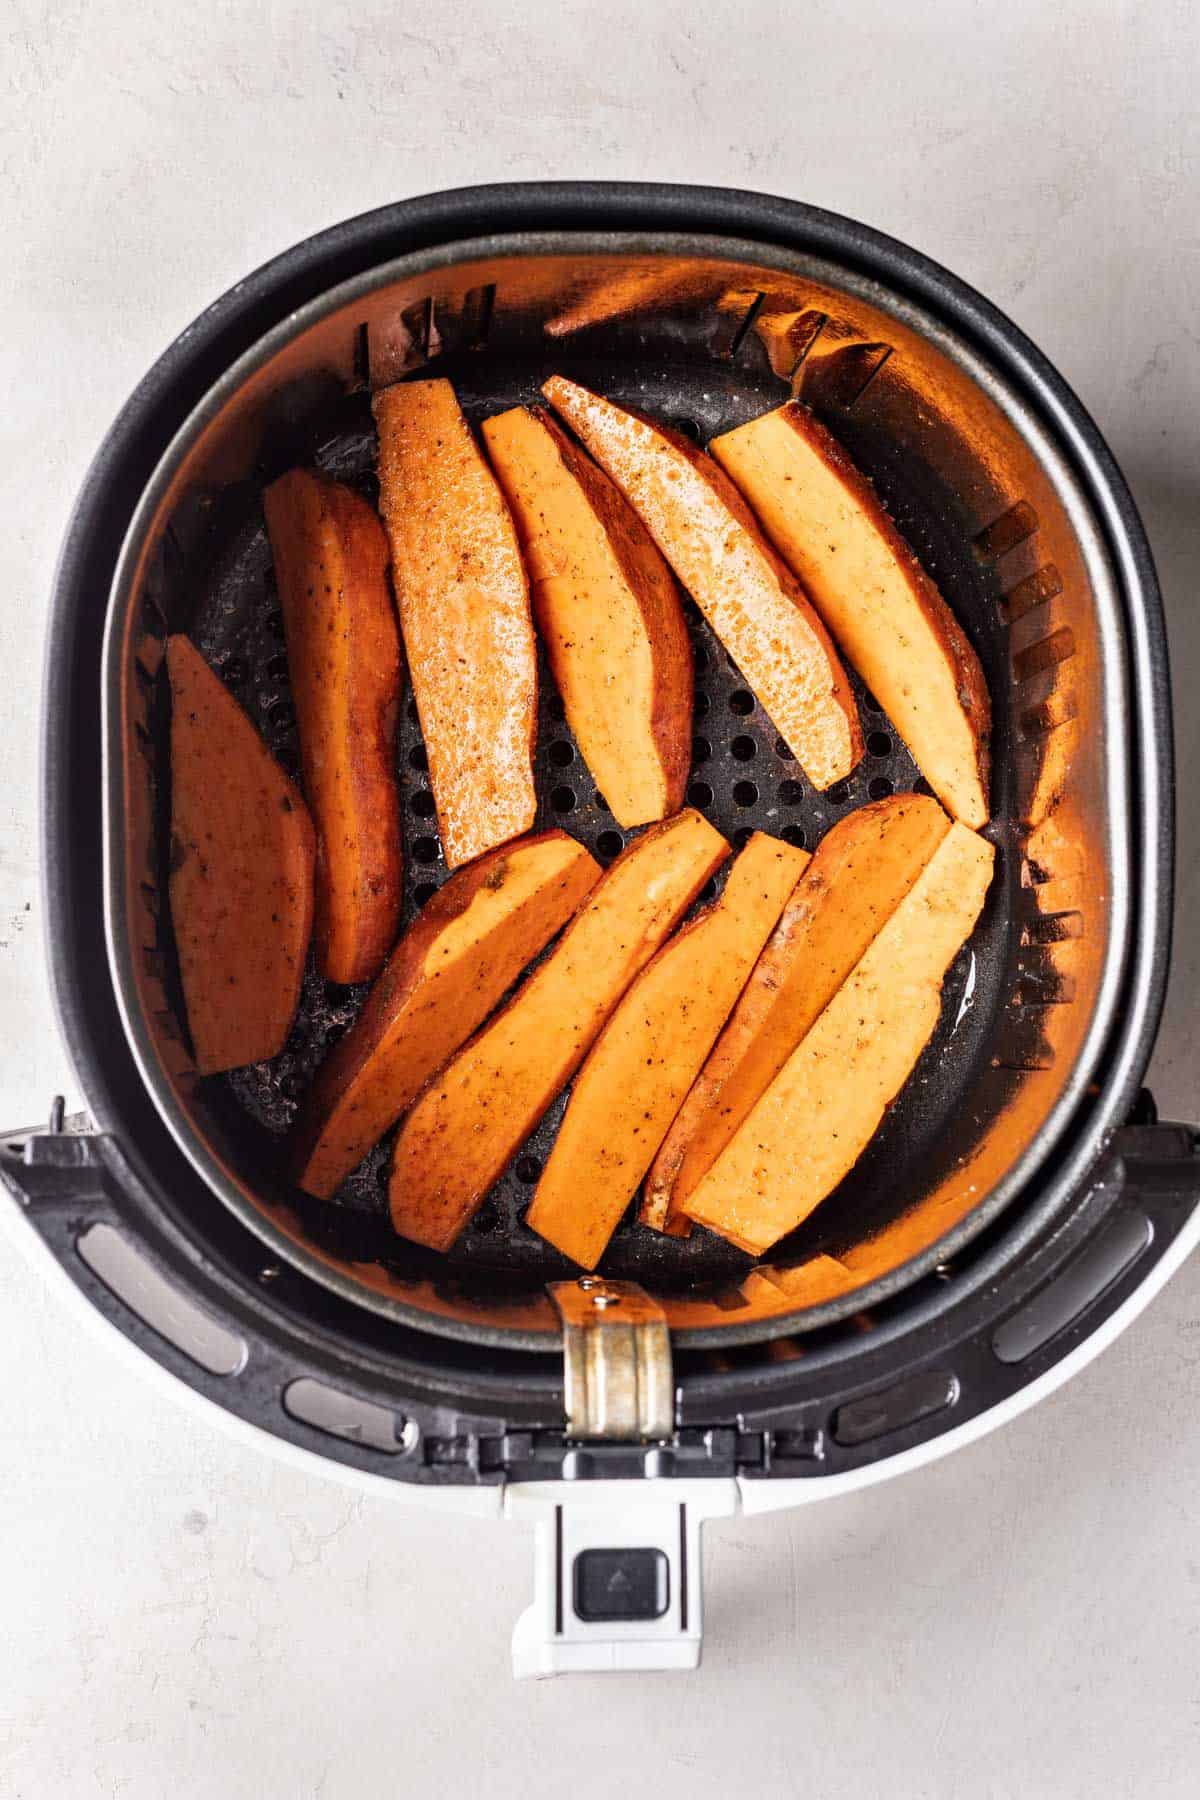 Uncooked sweet potato wedges in the air fryer.